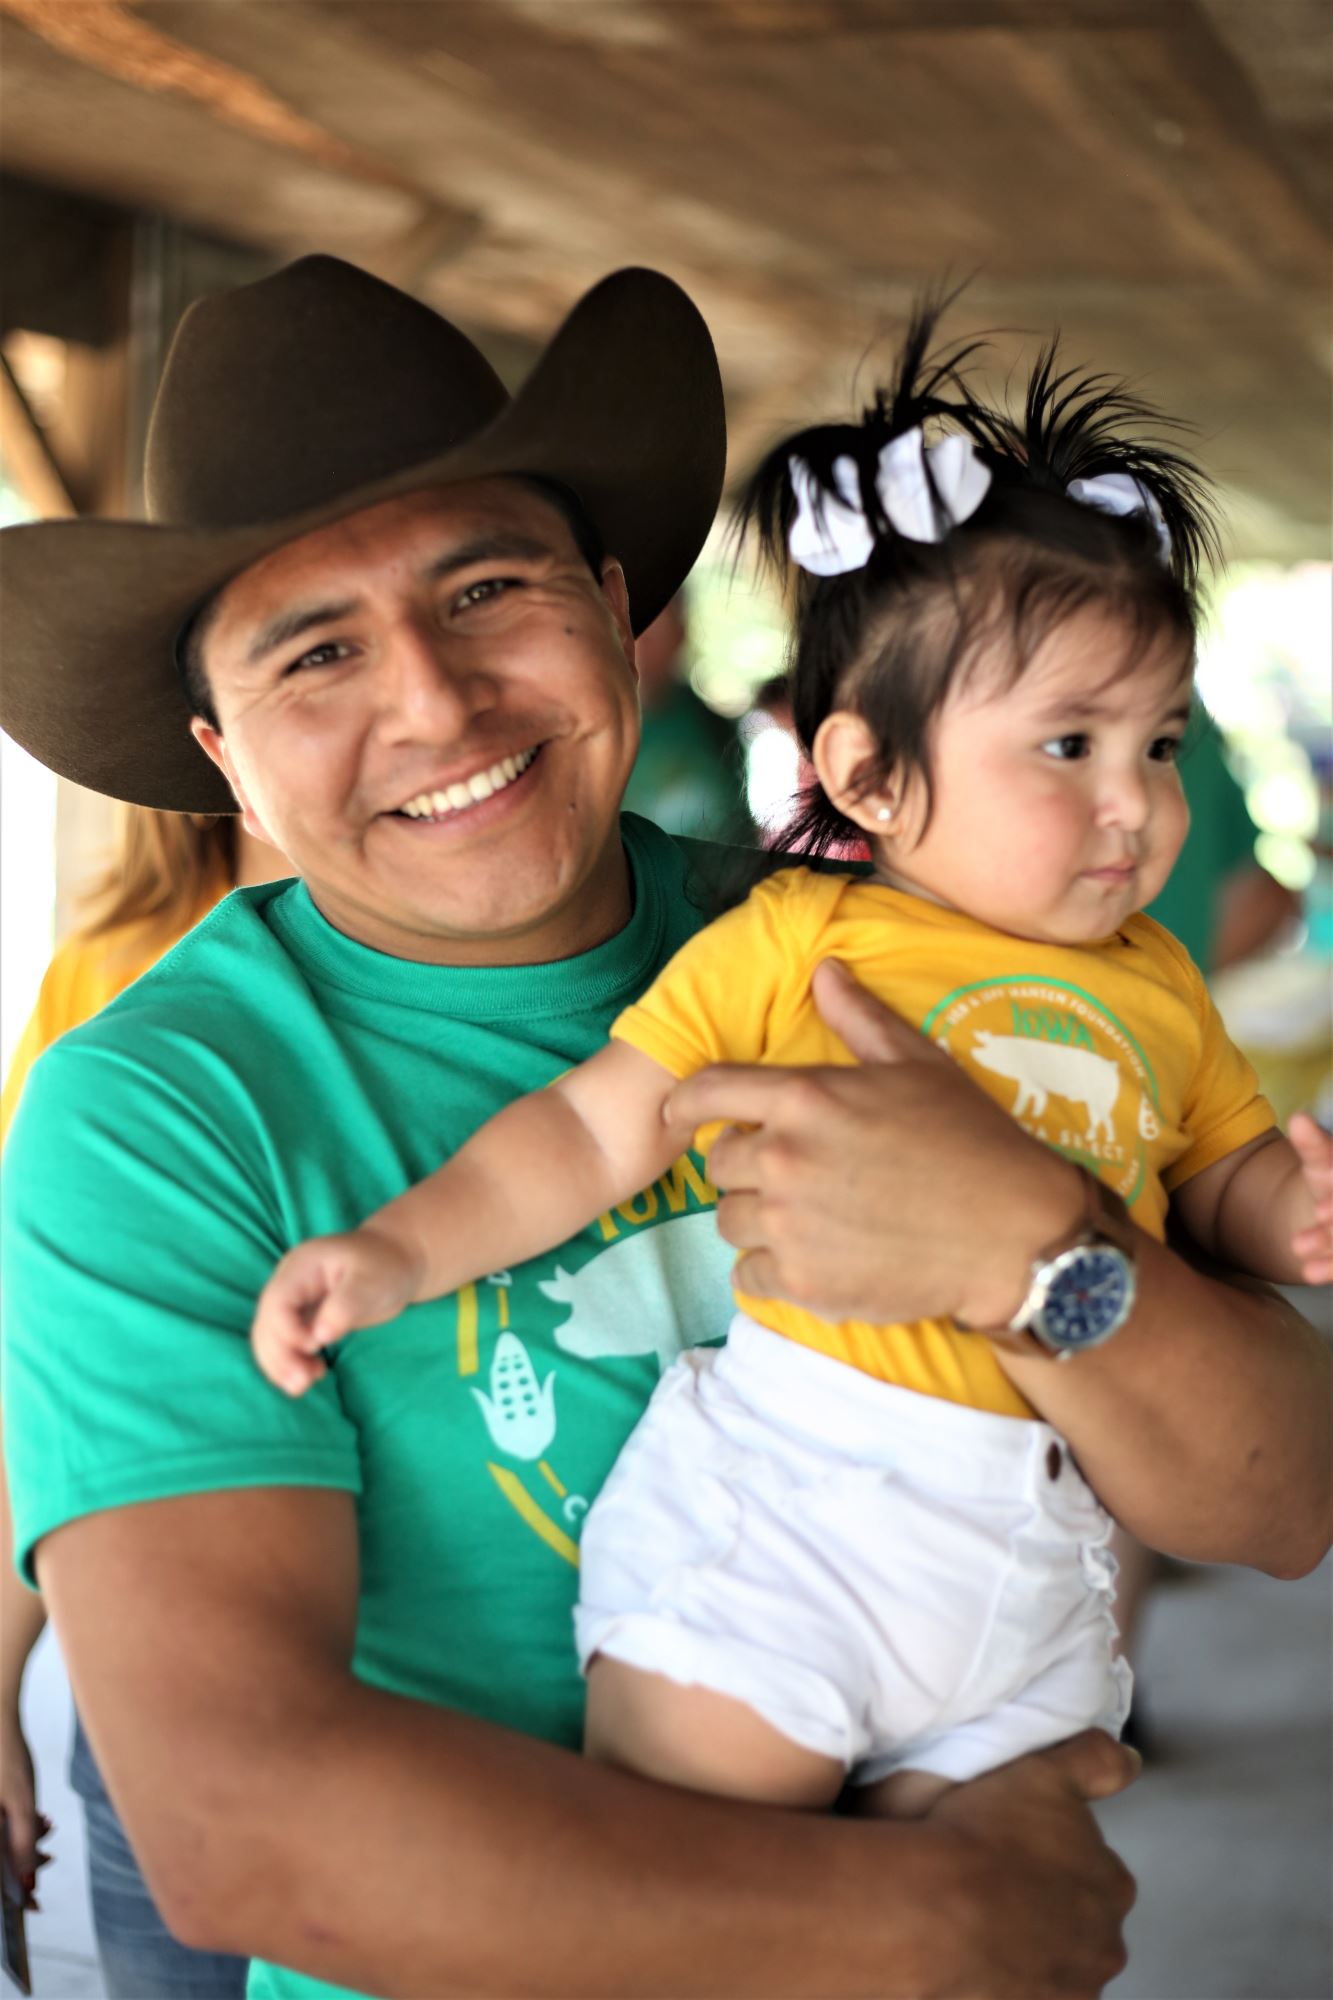 A man in a cowboy hat holds a baby.